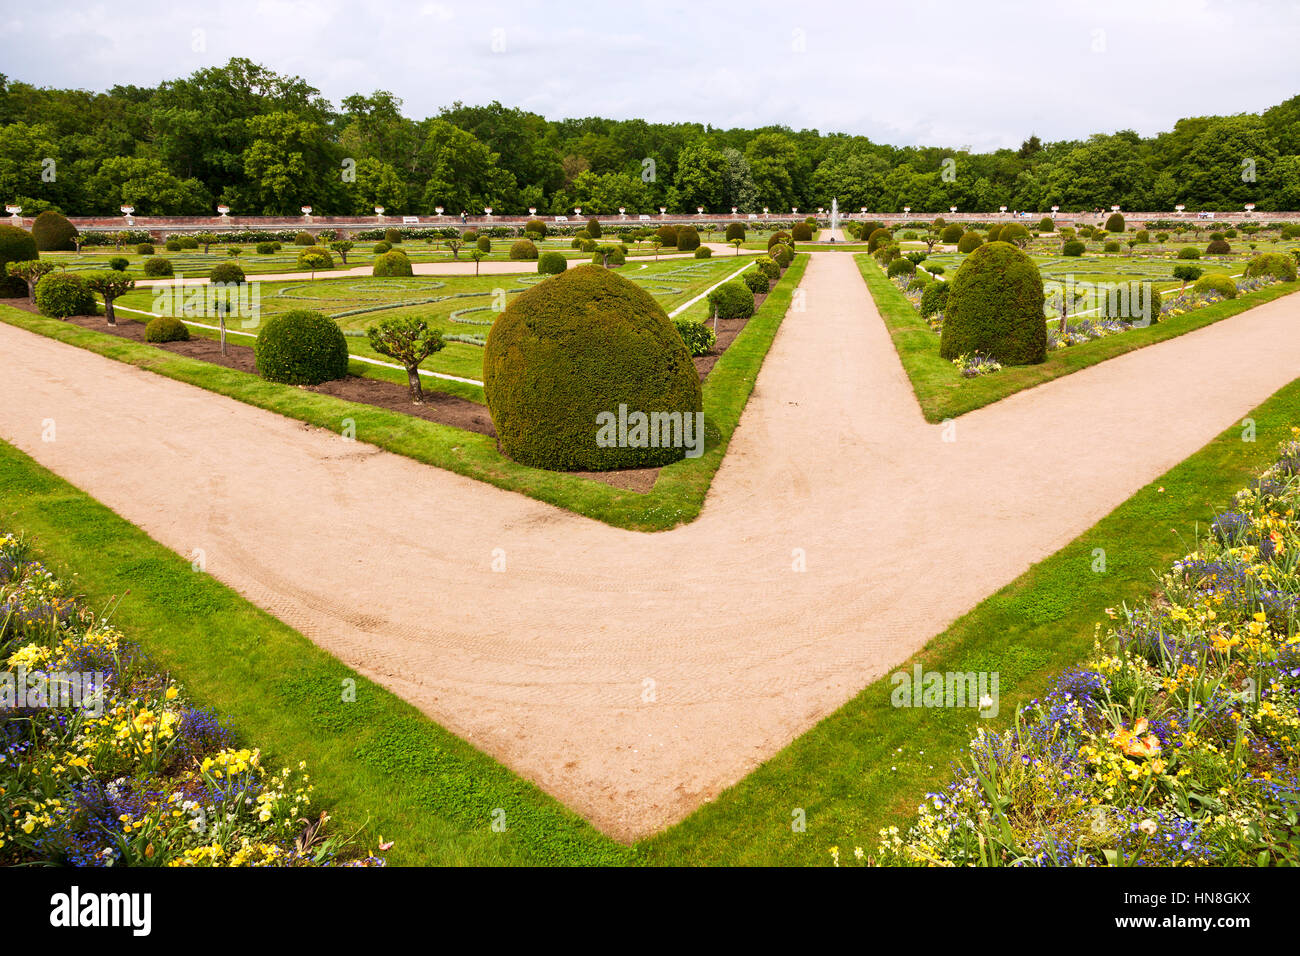 Chenonceau, France - June 5, 2010: Panoramic view of Catherine de Medici's gardens at Loire Valley Château de Chenonceau Stock Photo